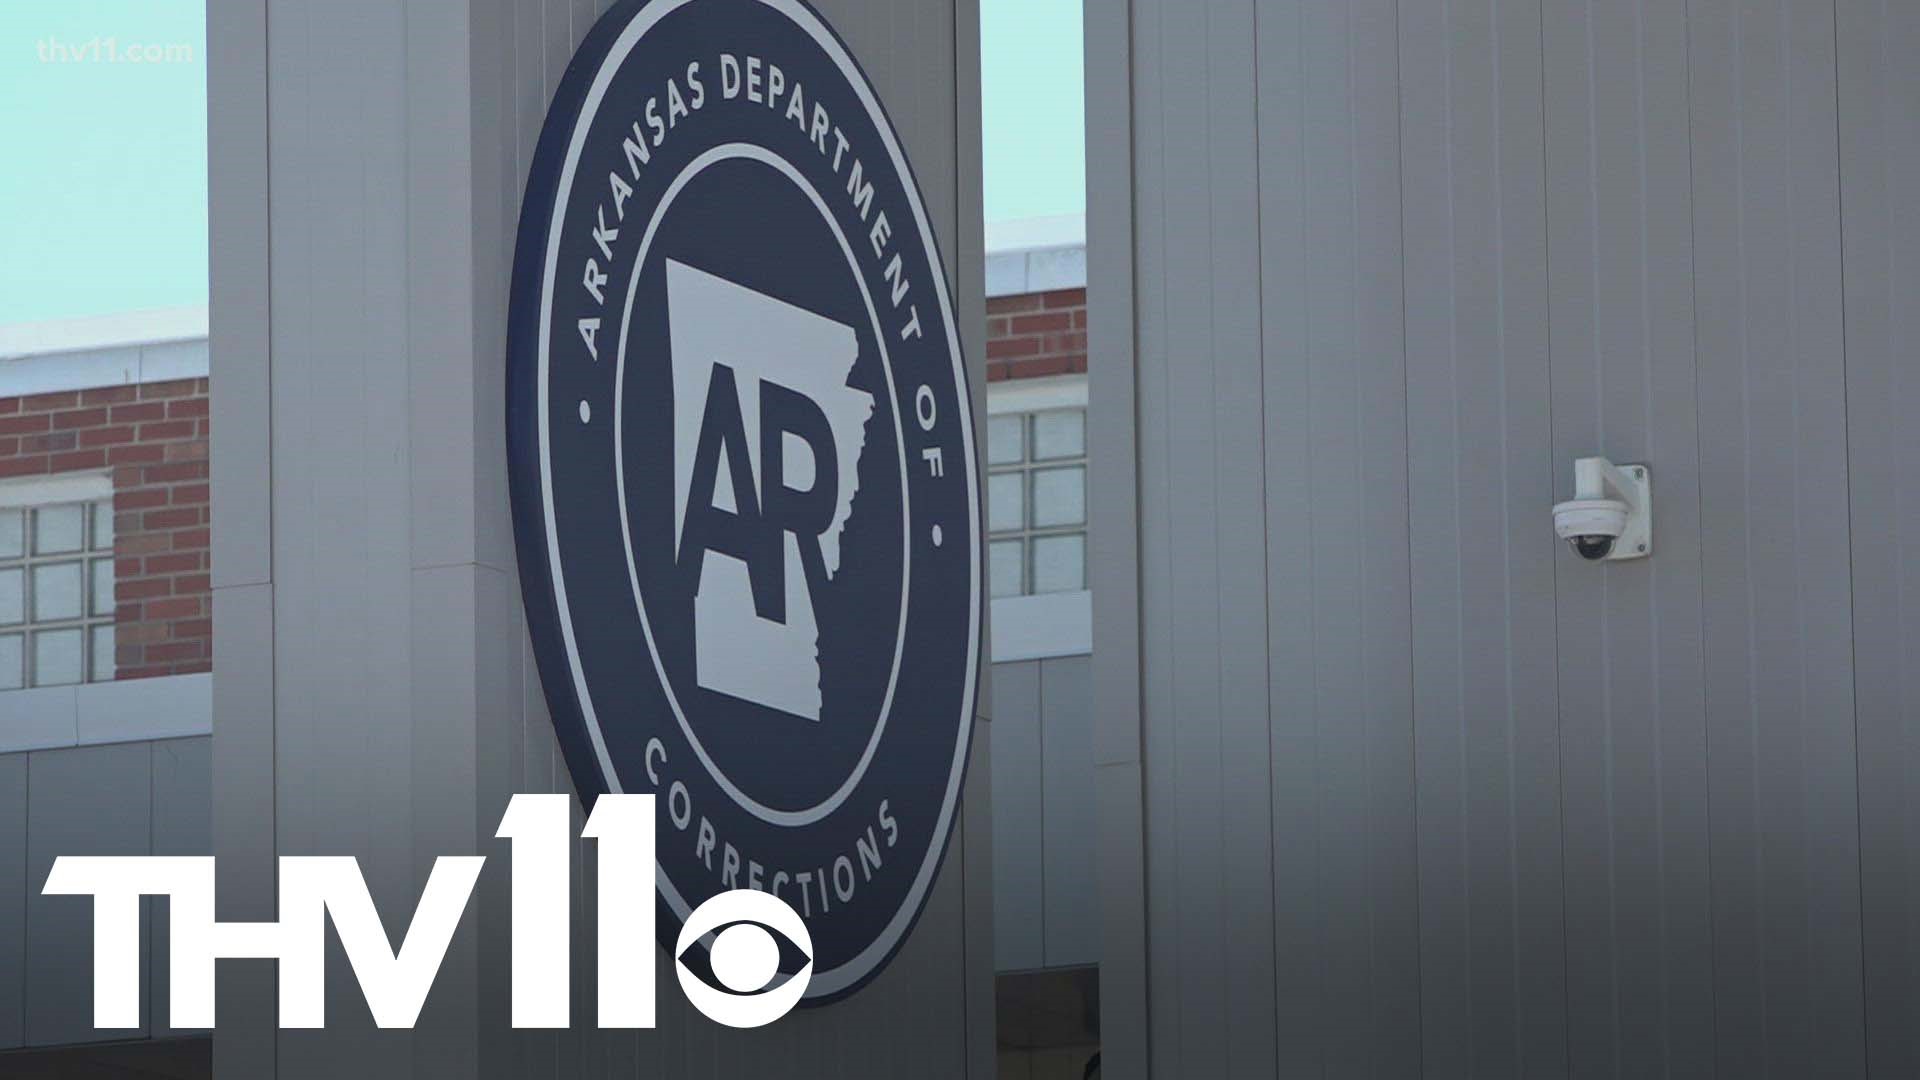 Arkansas Dept. of Corrections officials challenged to find thousands of former inmates who have stopped checking in and are in violation of parole or probation.